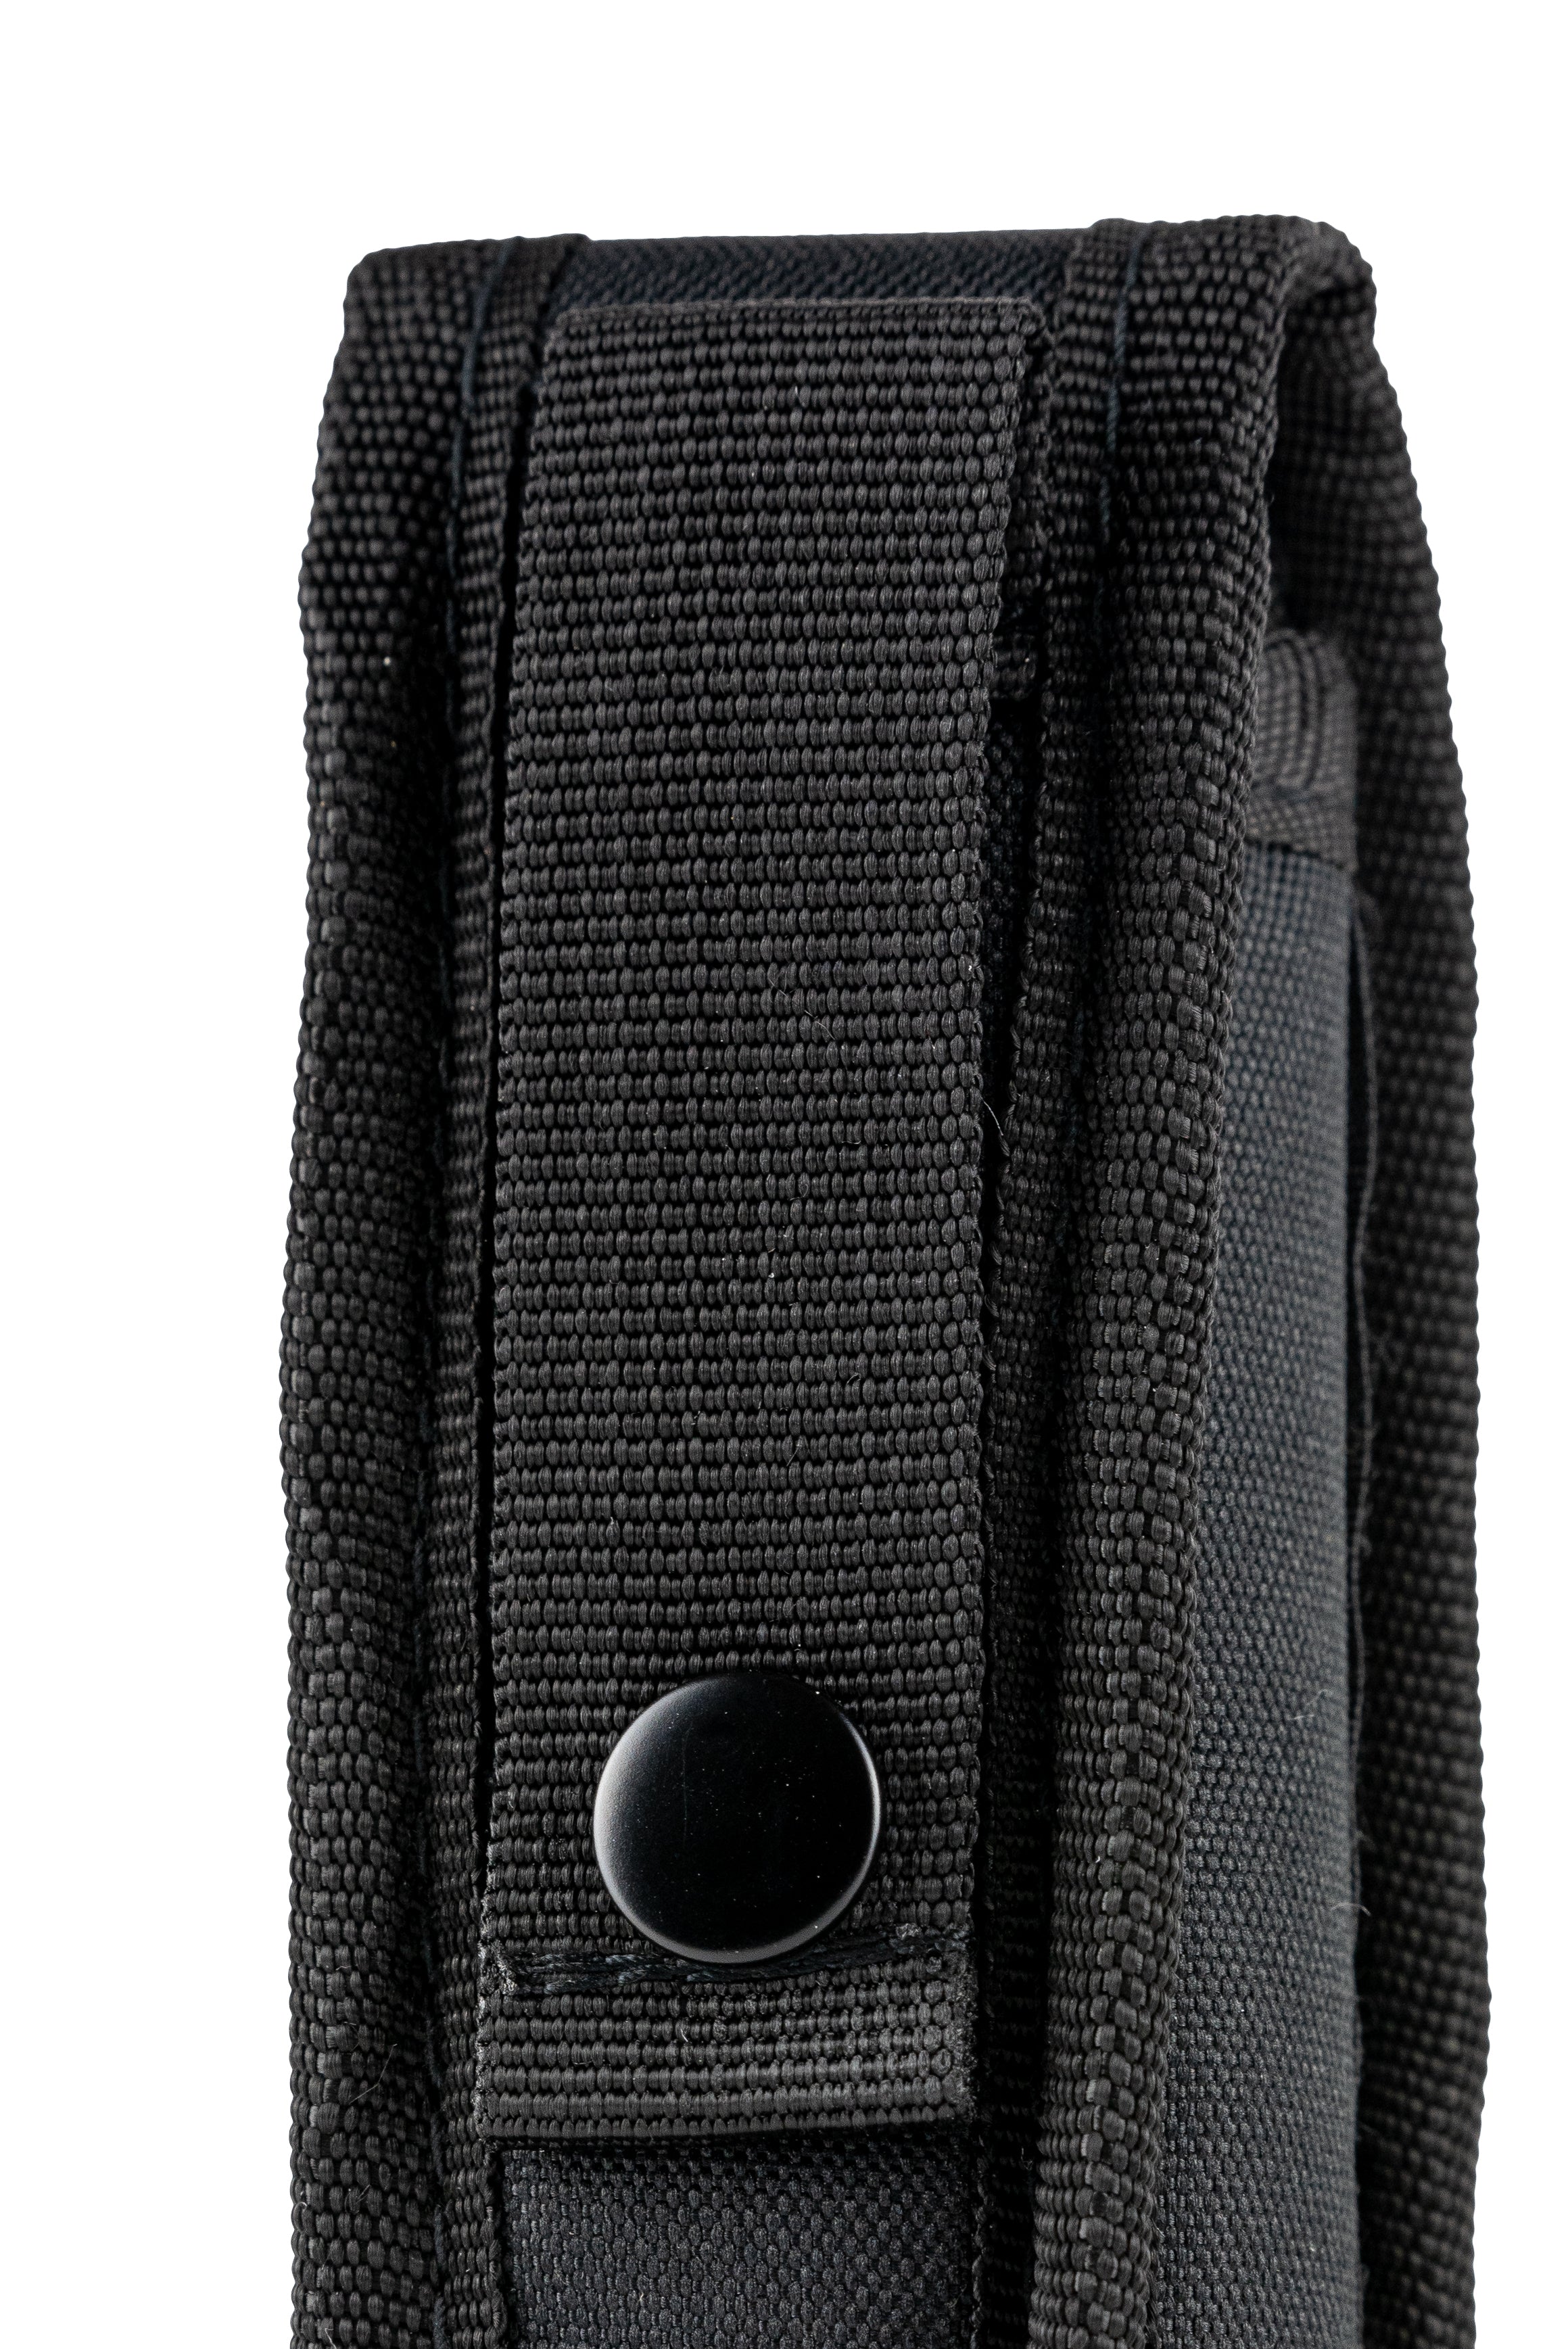 Jack Pyke Rifle Bolt Pouch in Black 